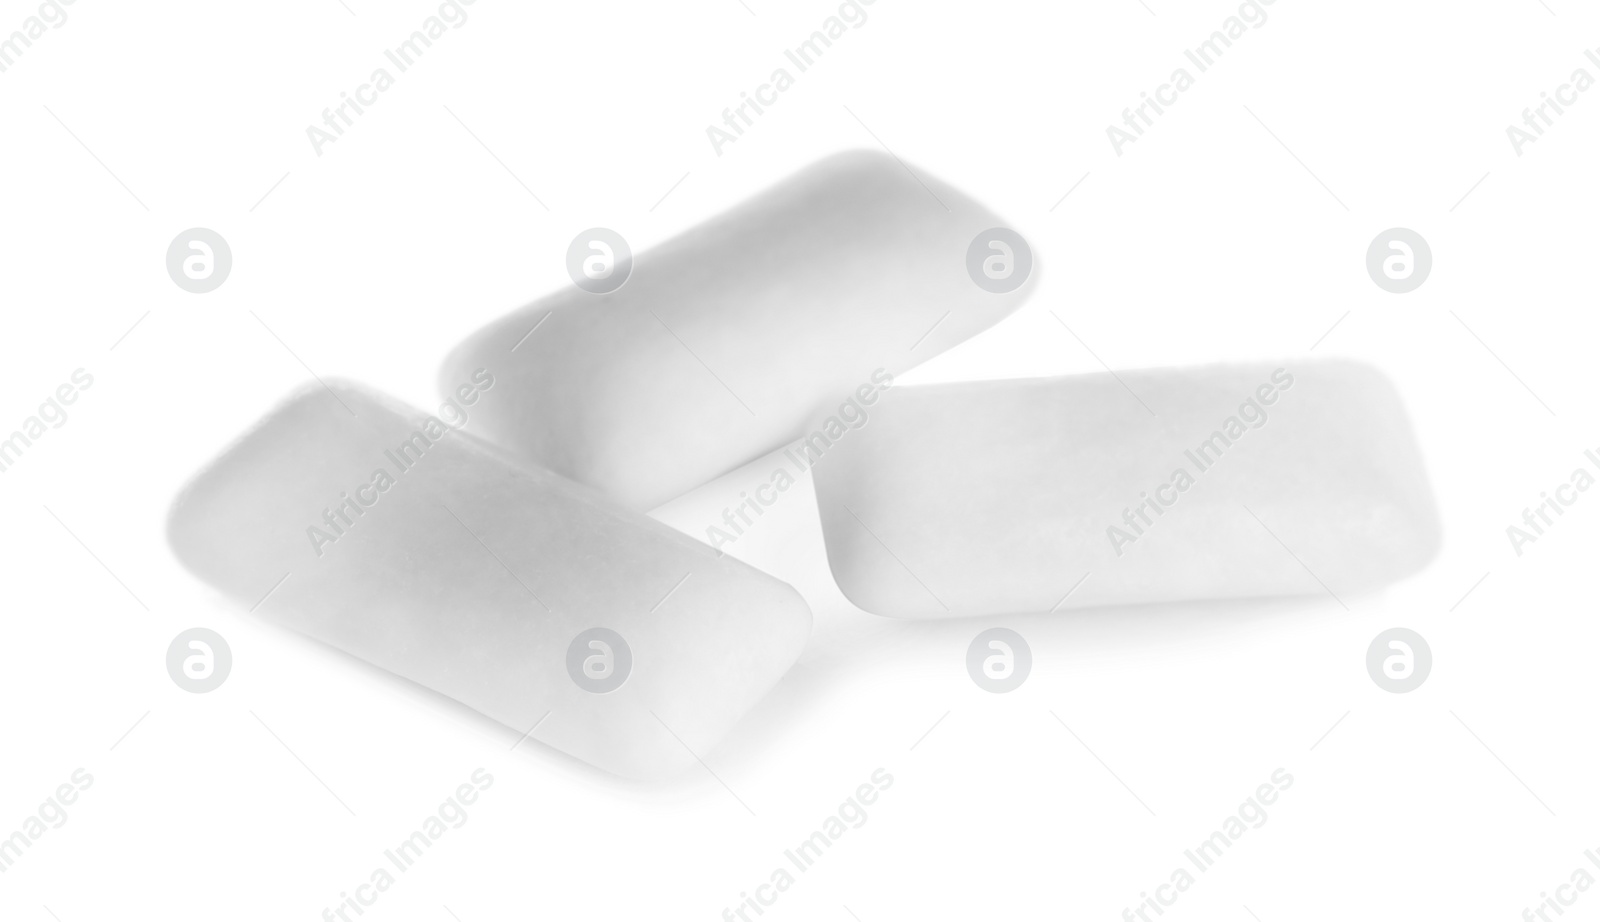 Photo of Three chewing gum pieces on white background